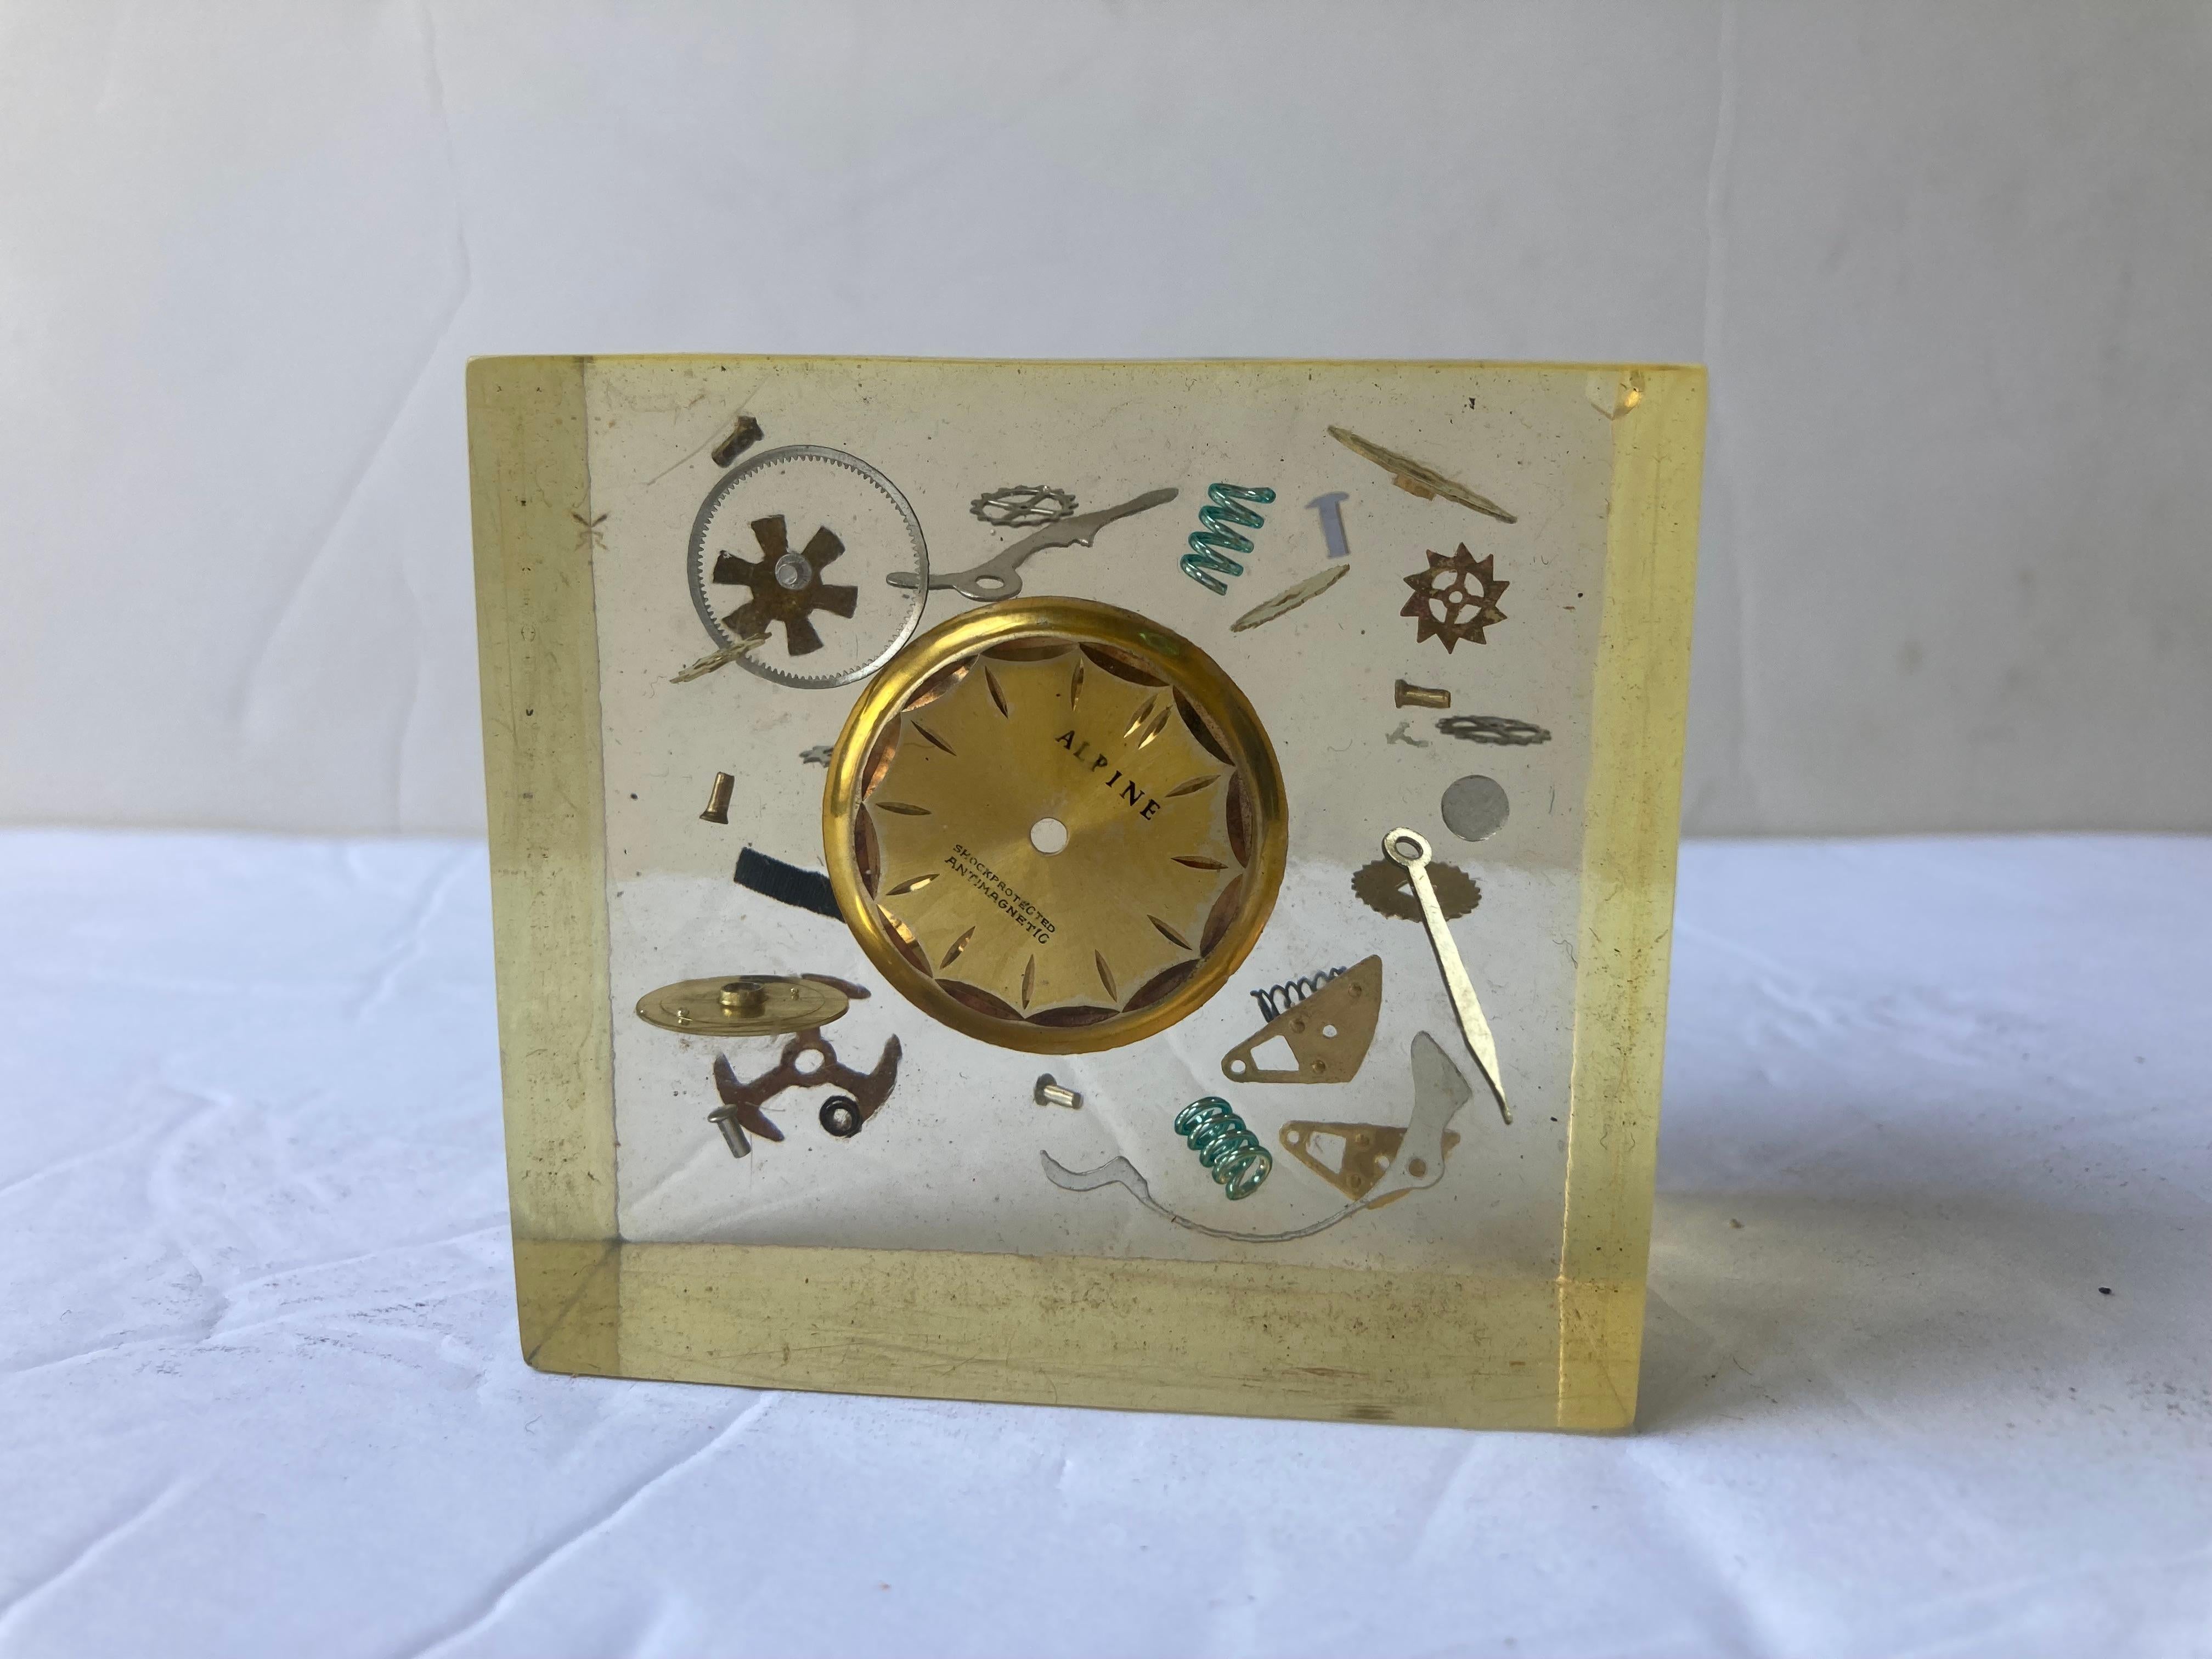 20th Century Lucite Resin Sculpture/Paperweight Attb to Pierre Giraudon with Clock Parts For Sale